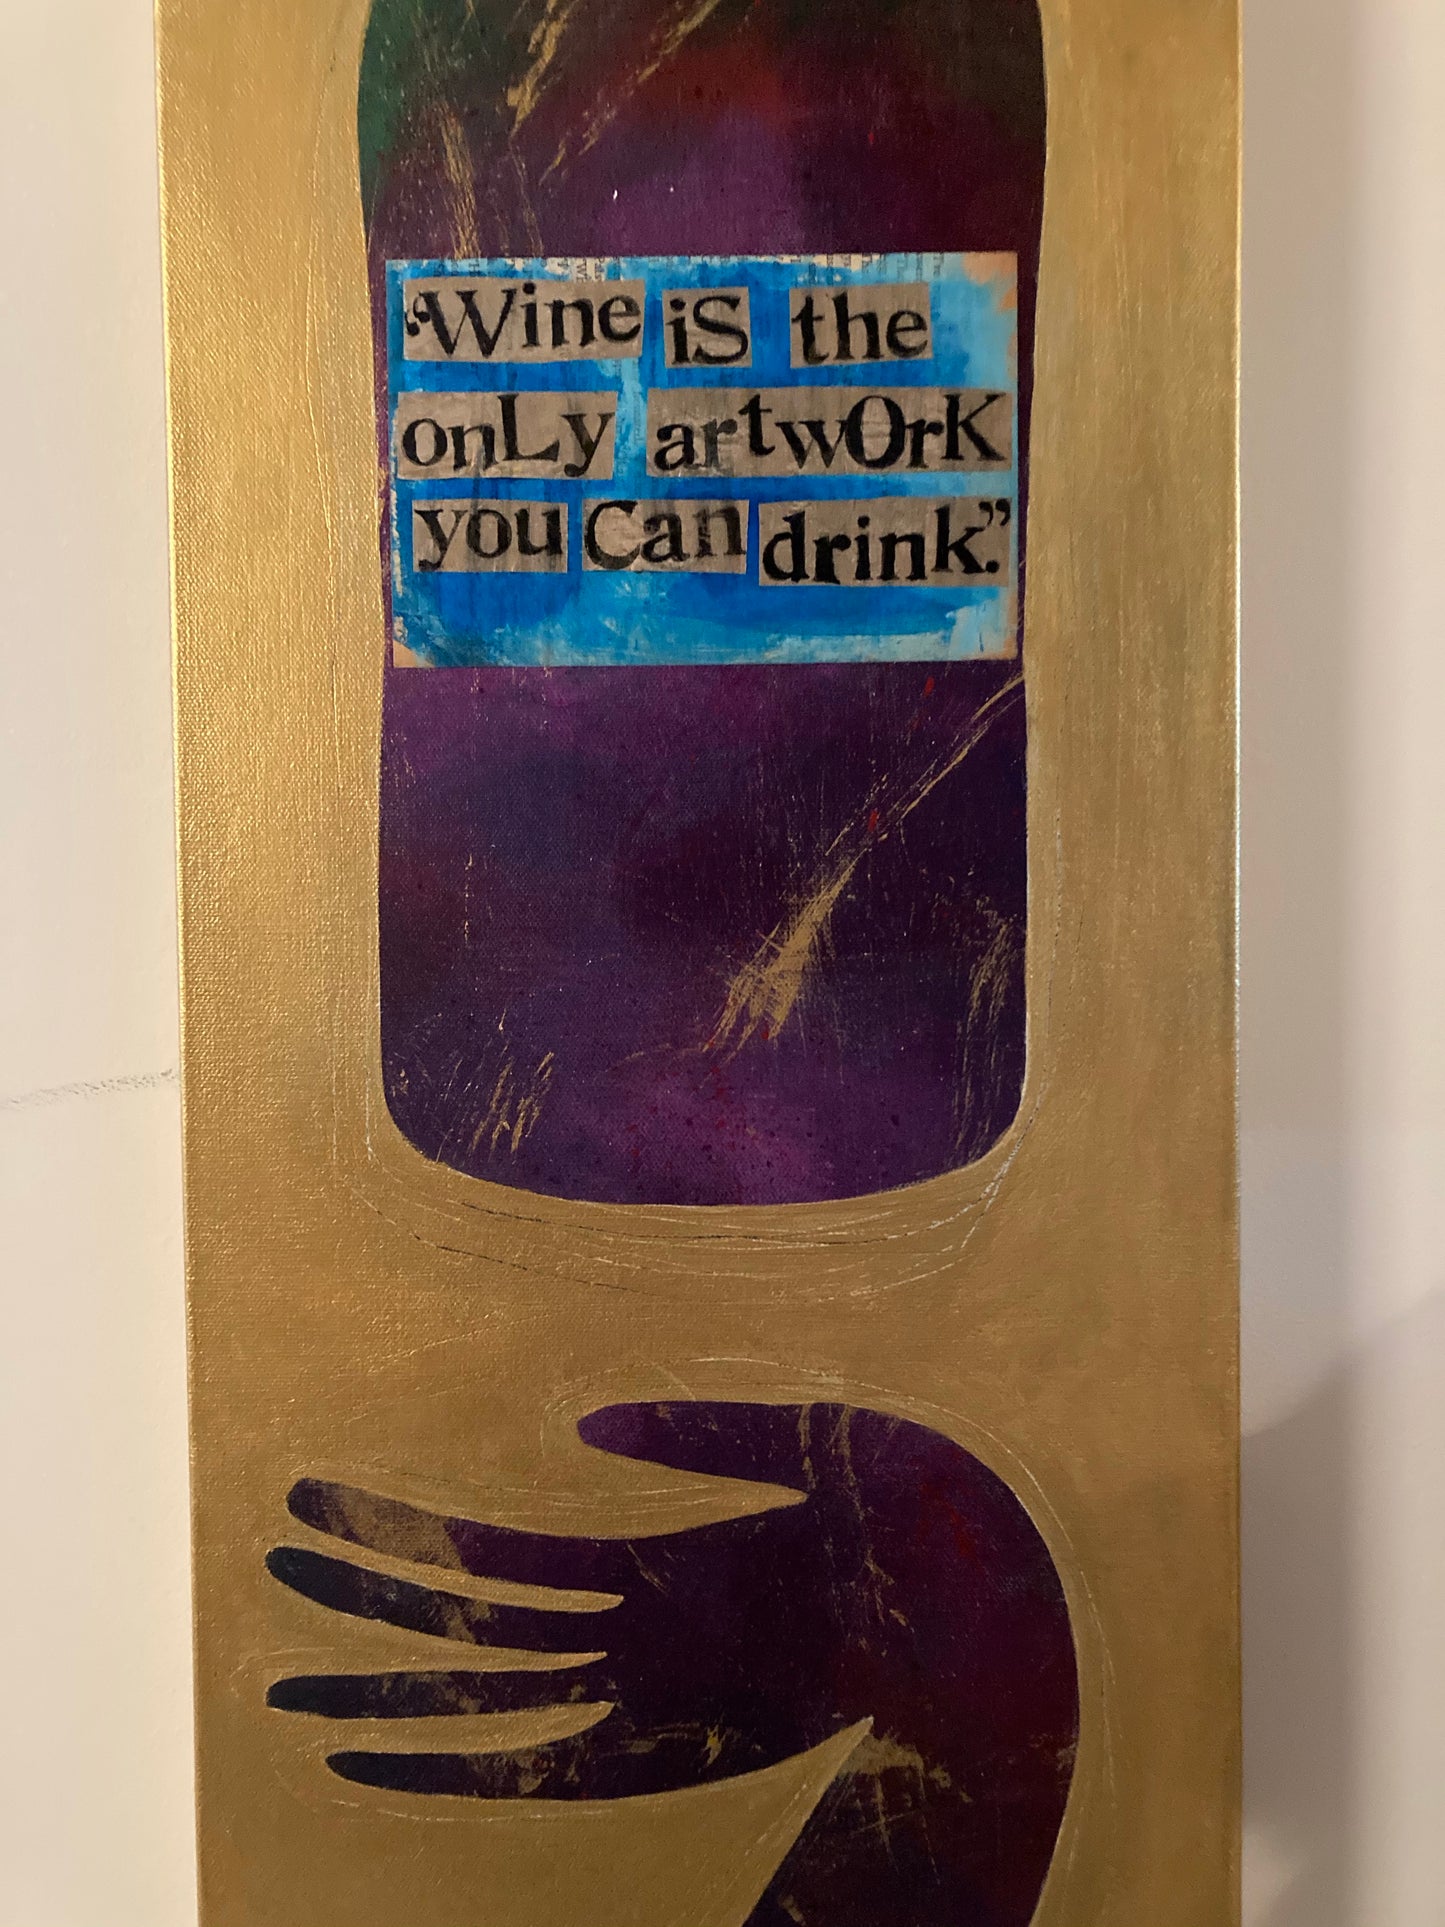 “Art You Can Drink”